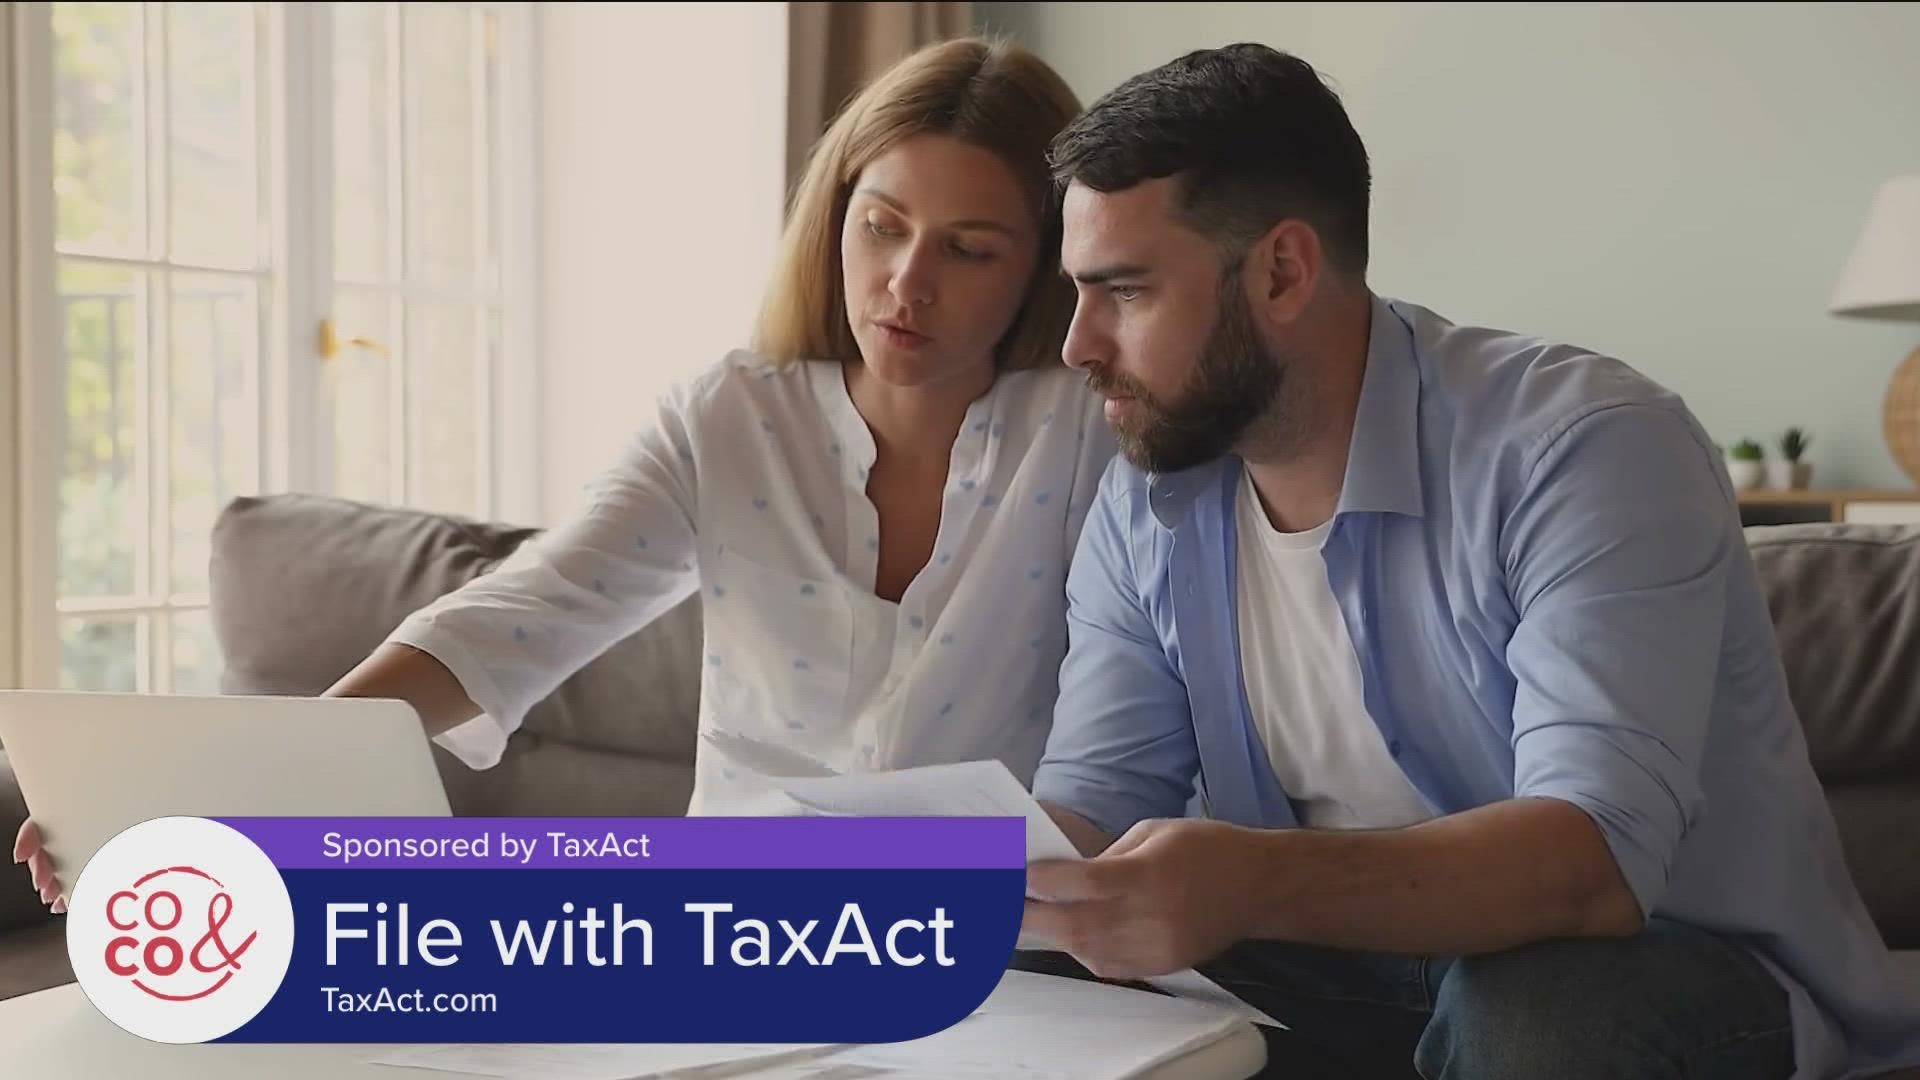 TaxAct has helped more than 90 million filers take the stress out of tax season. Learn more and get started at TaxAct.com. **PAID CONTENT**